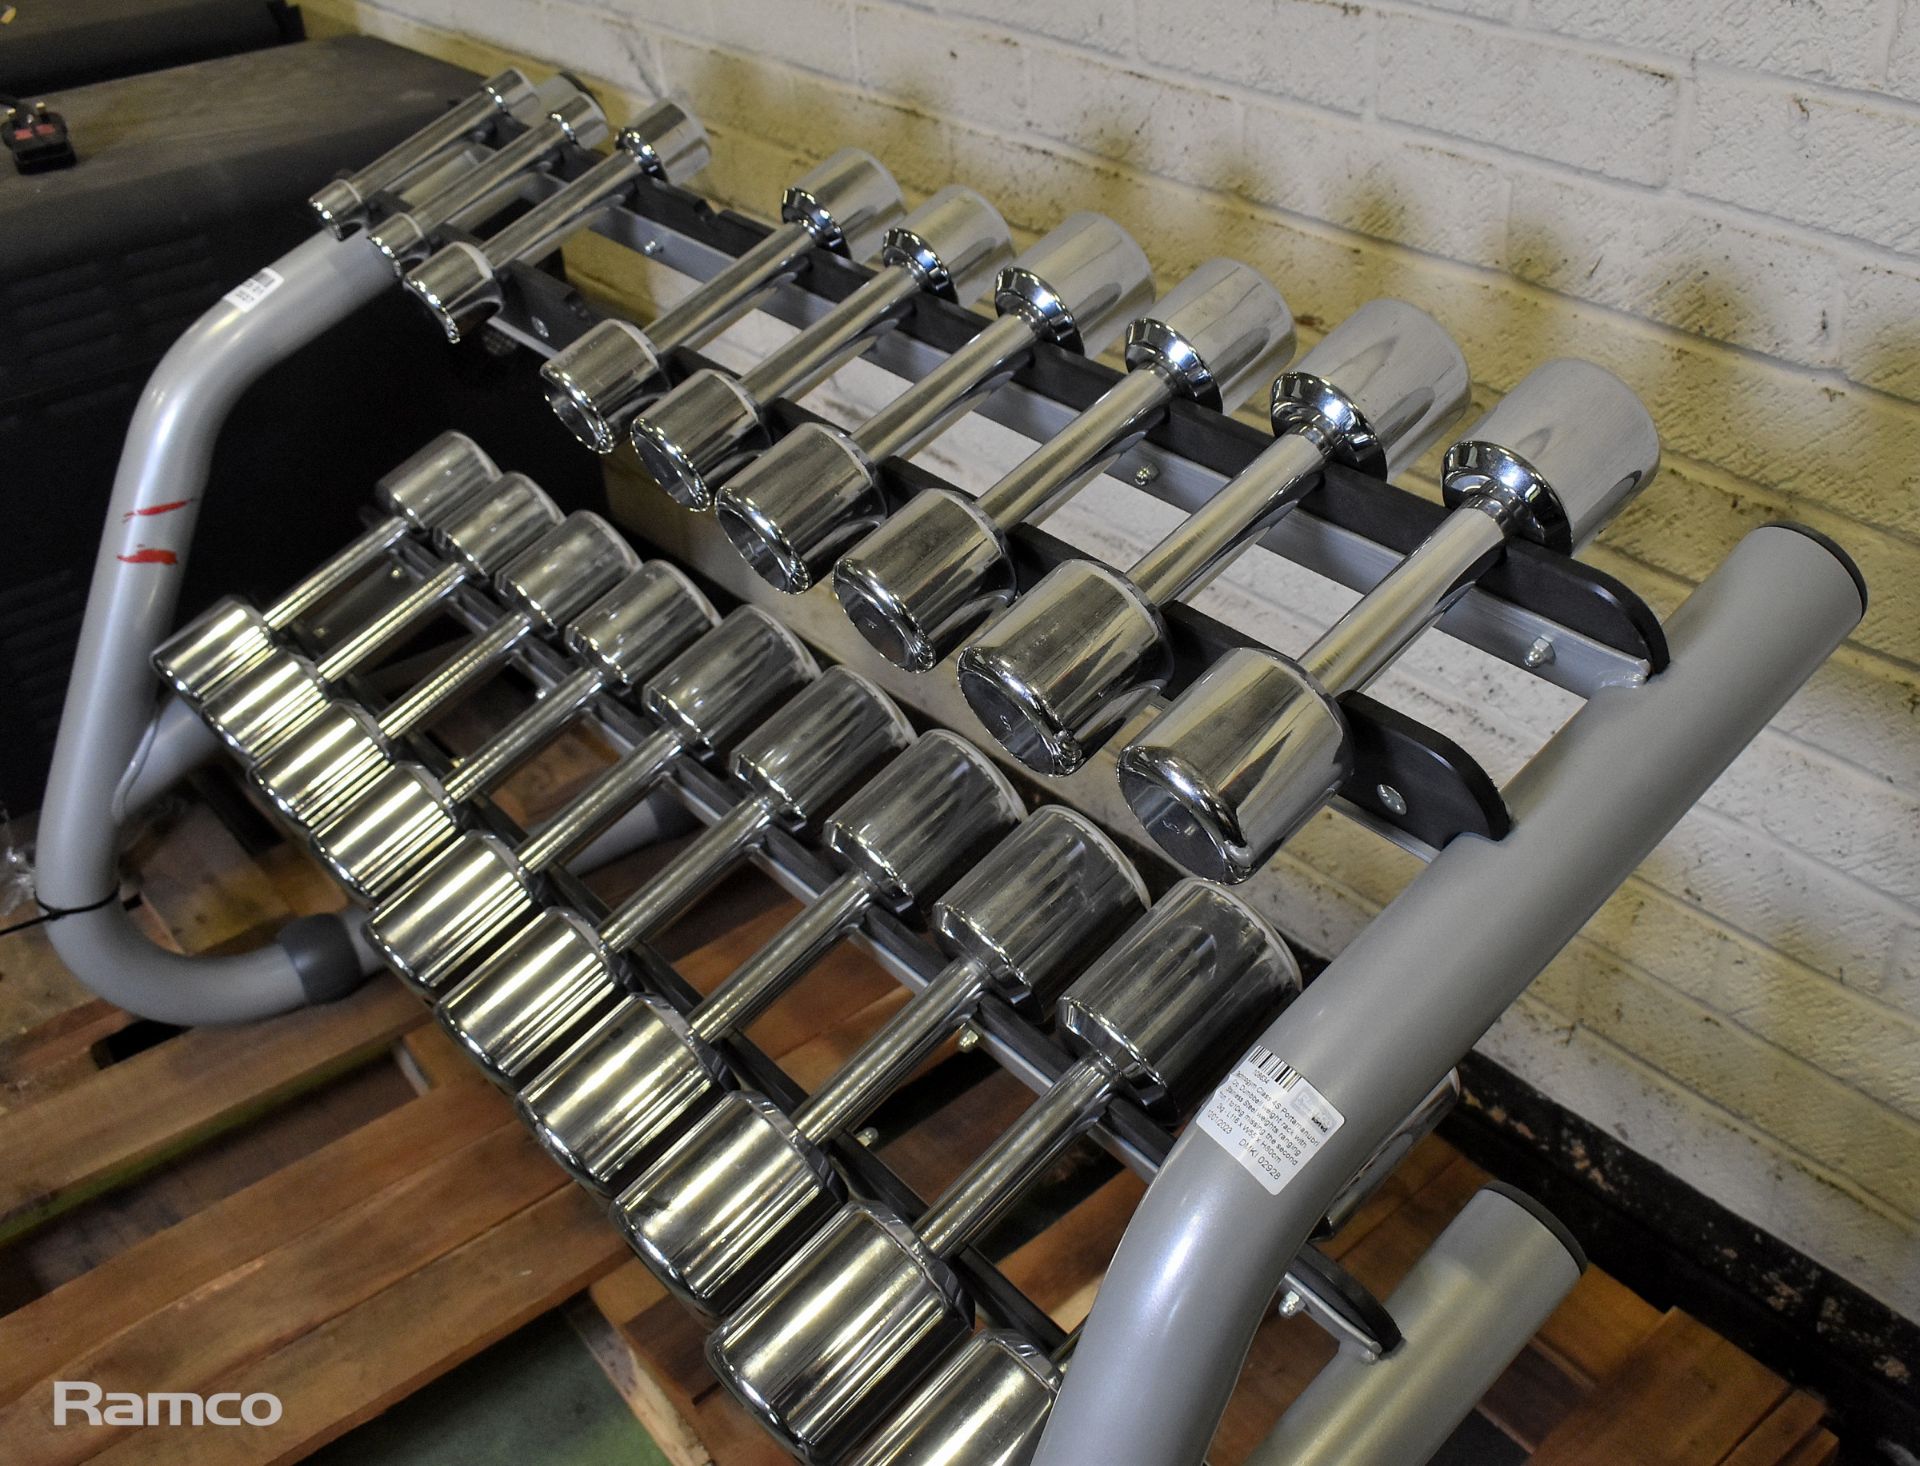 Technogym Class 4S Porta Manubri Cro, Dumbbell weight rack with Stainless Steel weights - Image 2 of 3